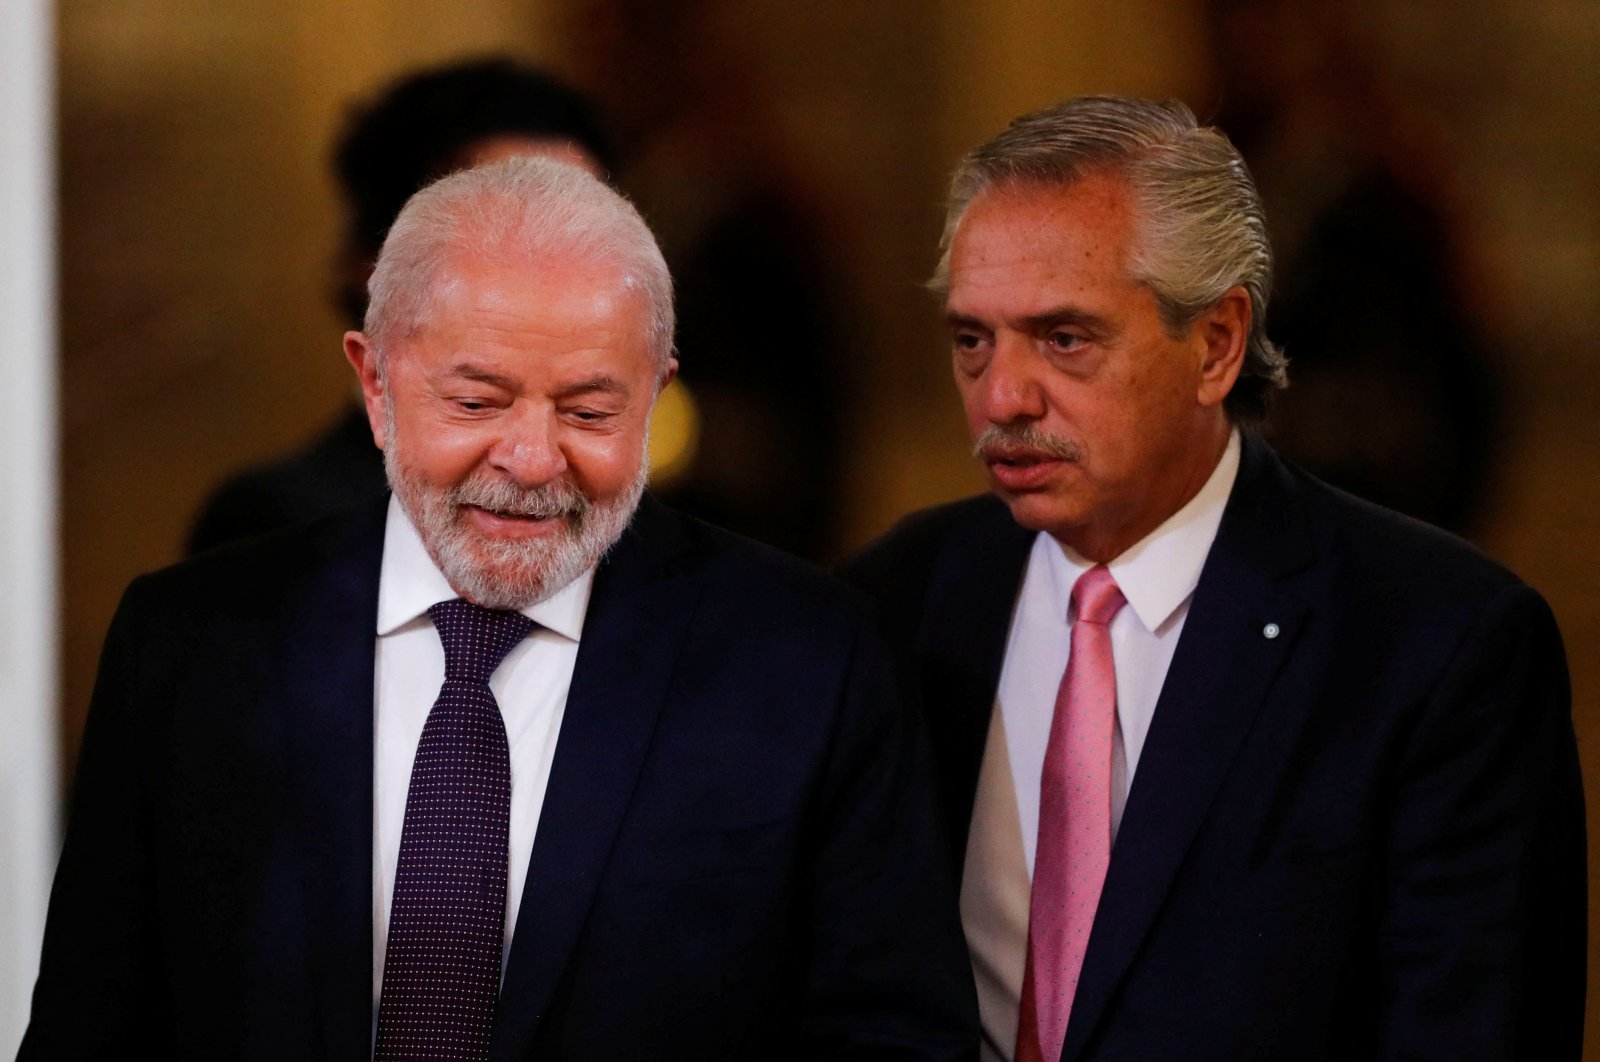 Brazil&#039;s President Luiz Inacio Lula da Silva and Argentina&#039;s President Alberto Fernandez attend a bilateral agreement signing ceremony, during Lula da Silva&#039;s first official visit abroad since his inauguration, at the Casa Rosada Presidential Palace, Buenos Aires, Argentina, Jan. 23, 2023. (Reuters Photo)